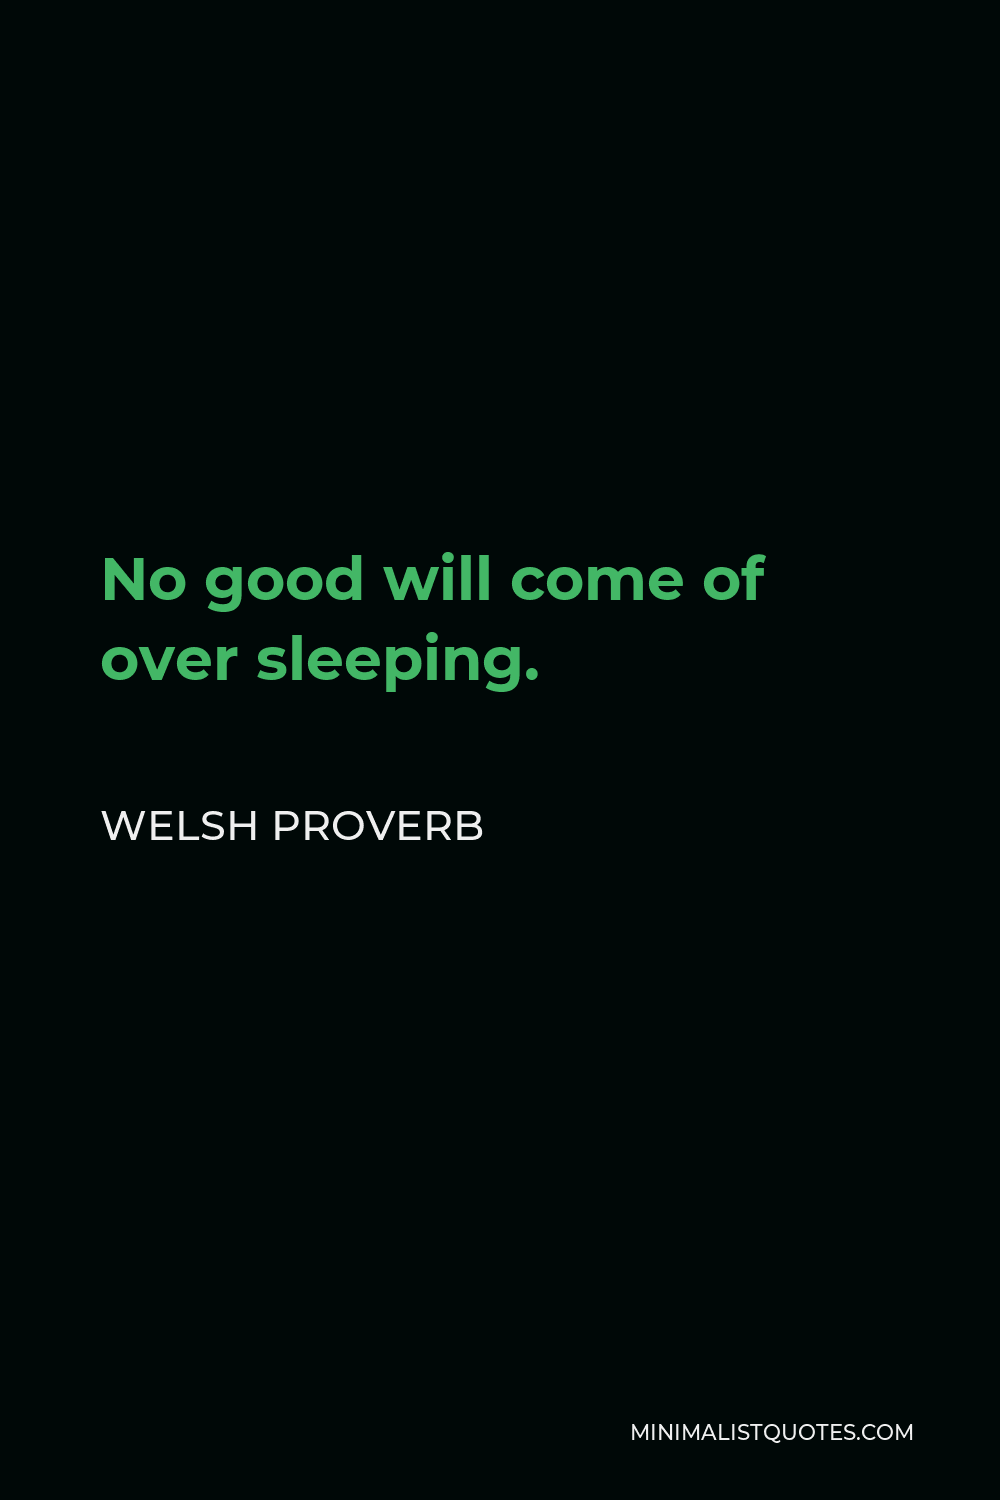 Welsh Proverb Quote - No good will come of over sleeping.